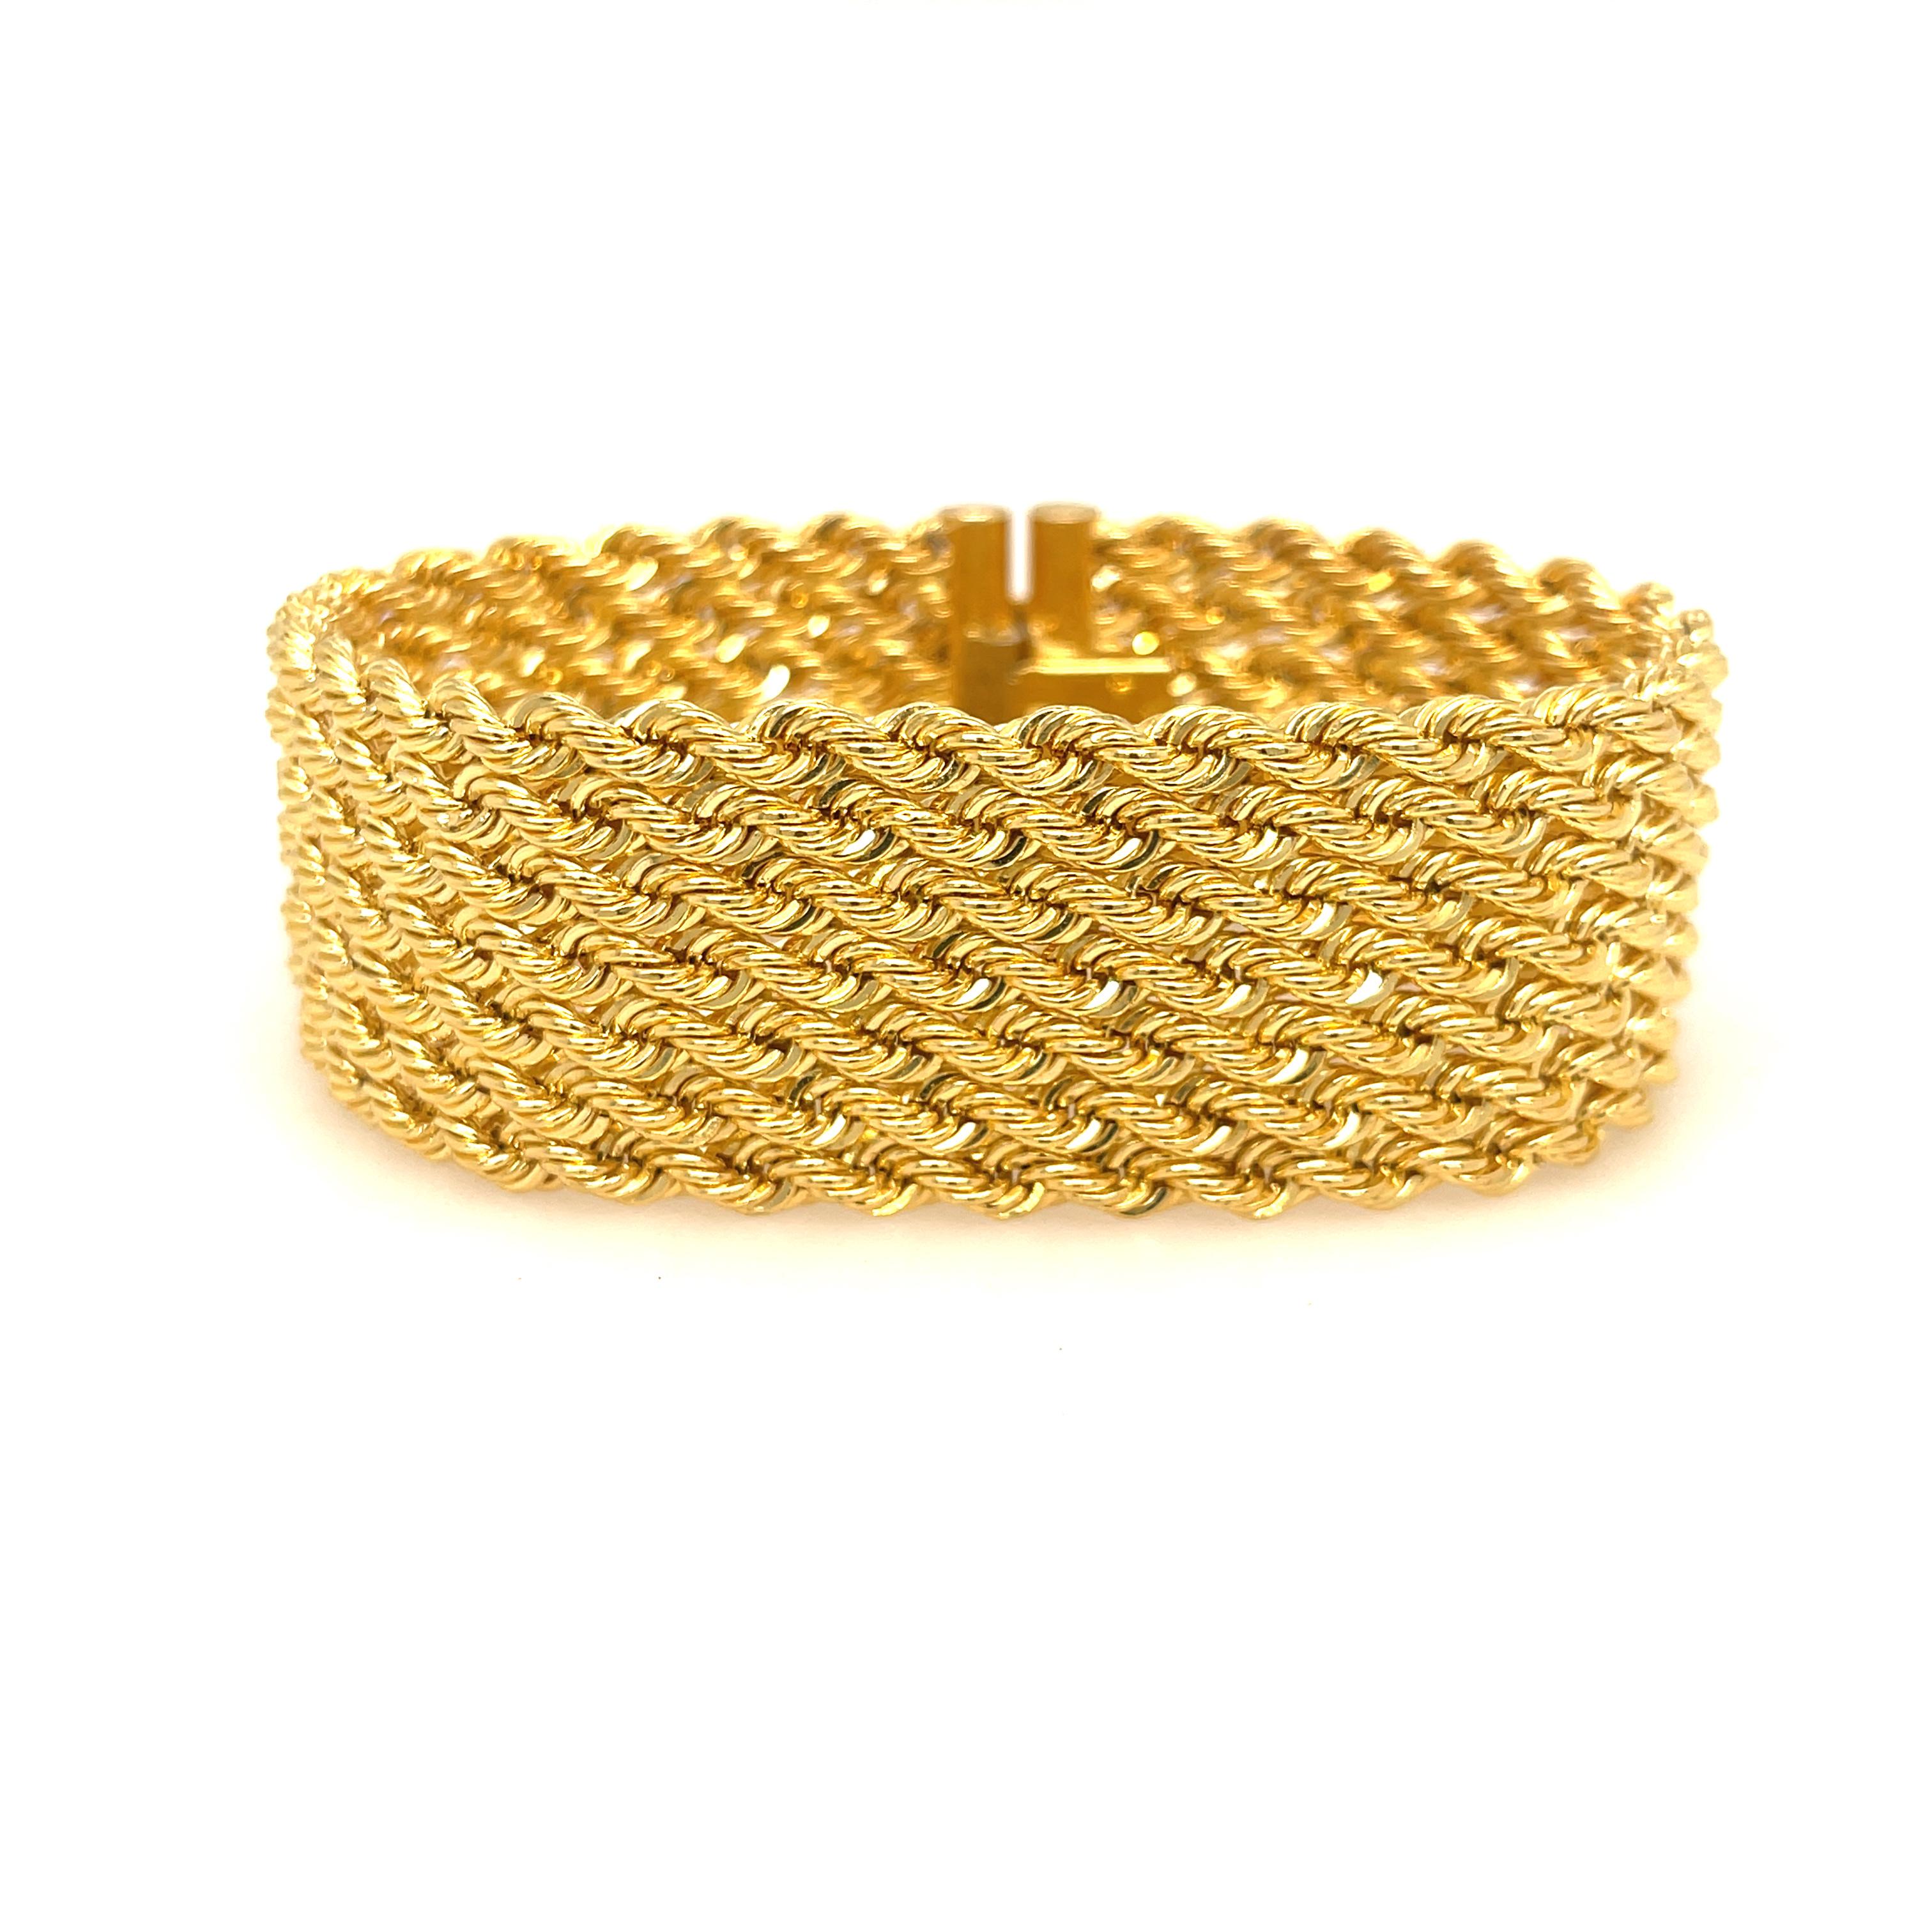 Seven Row Rope Bracelet in 18K Yellow Gold. 

1 inch wide
7.5 inches length
40 grams